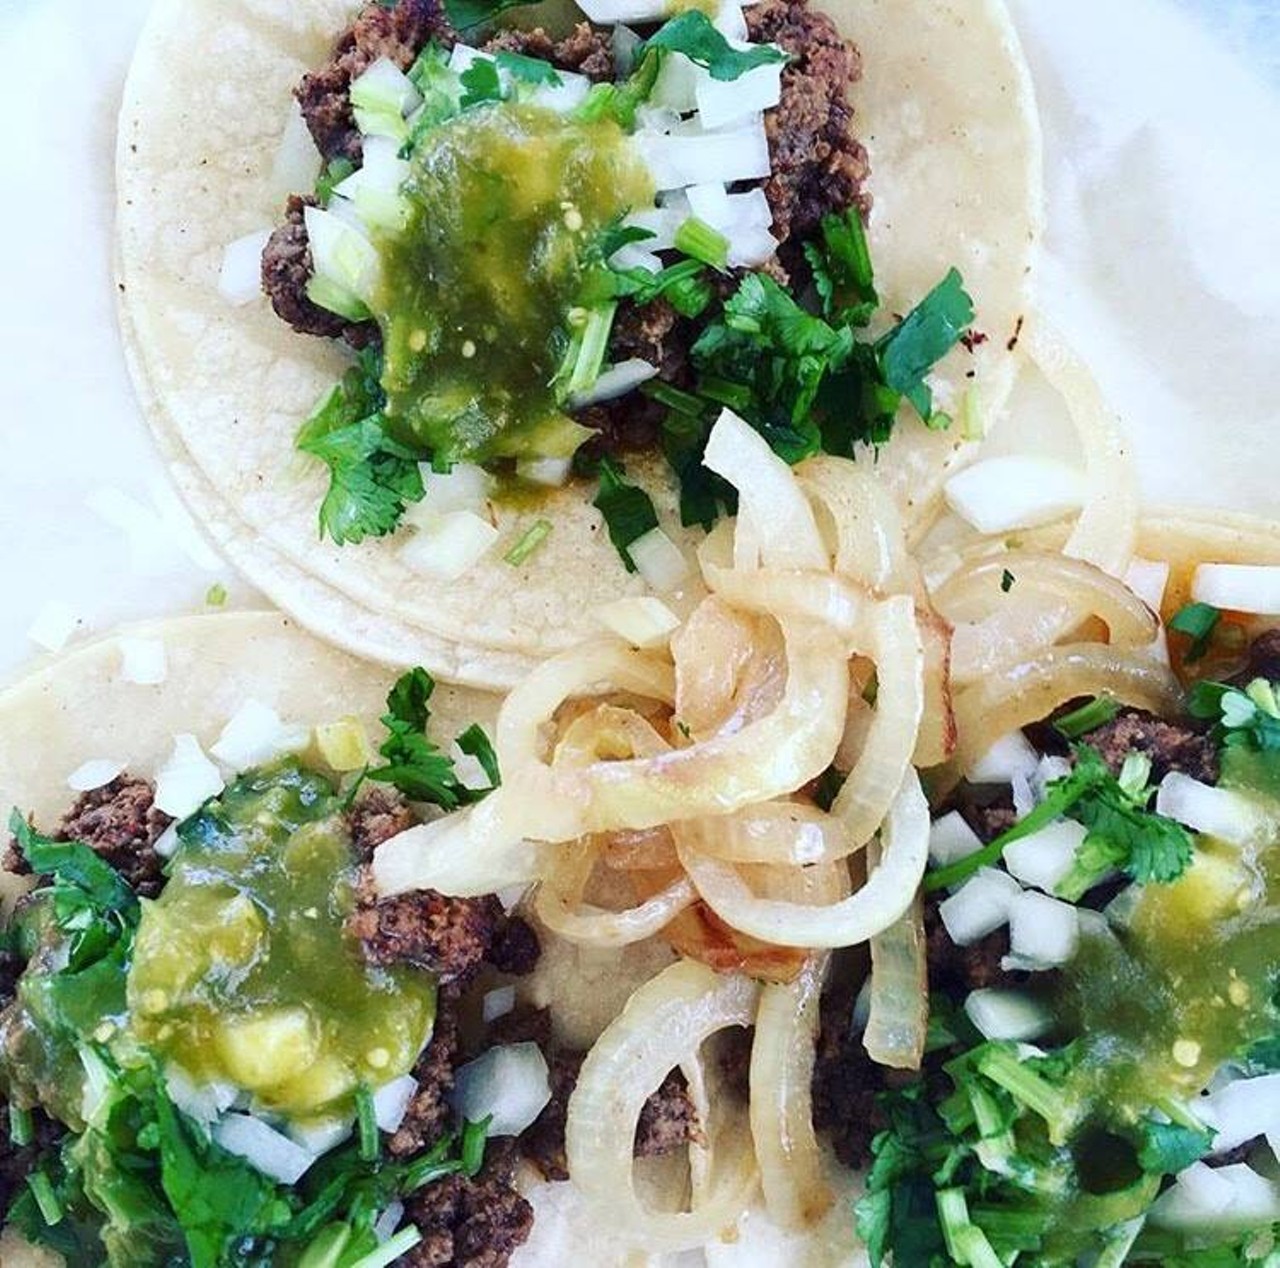 Las Cazuelas
4024 S Conway Rd, Orlando, (407) 250-4608
This little market off Conway offers a mix of homemade Mexican eats while you shop, and on Tuesdays, you can get two of their tacos wrapped in an authentic corn tortilla for just $3. 
Photo via Las Cazuelas/Facebook